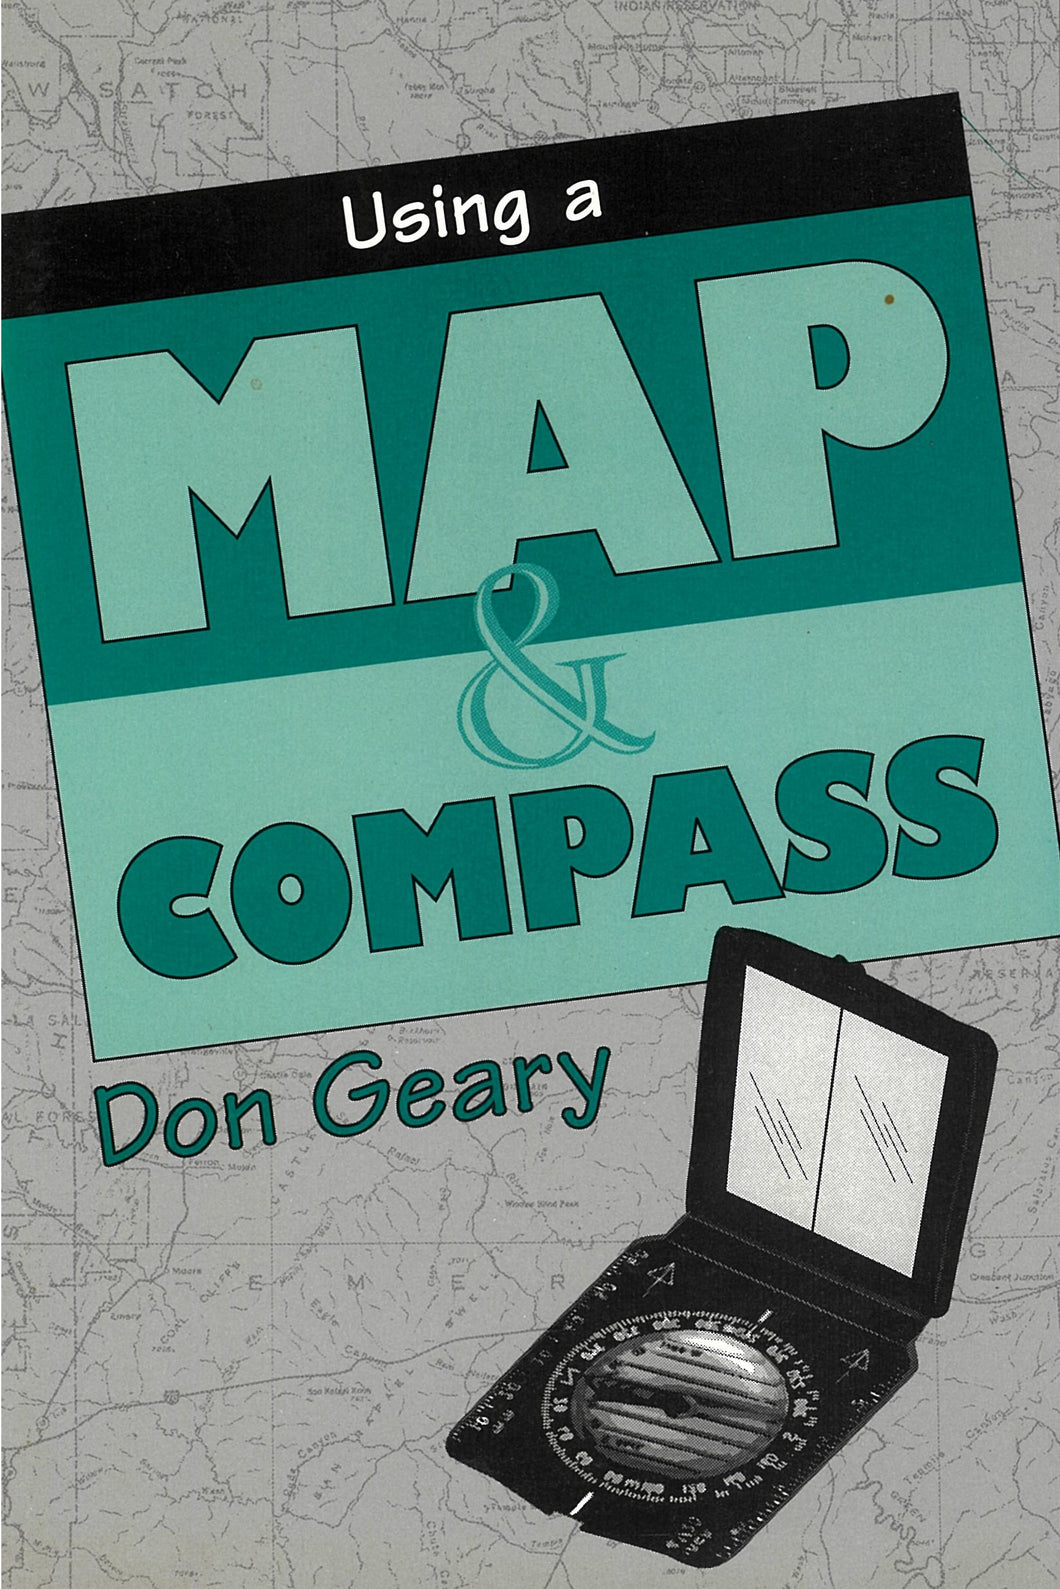 Using a Map and Compass